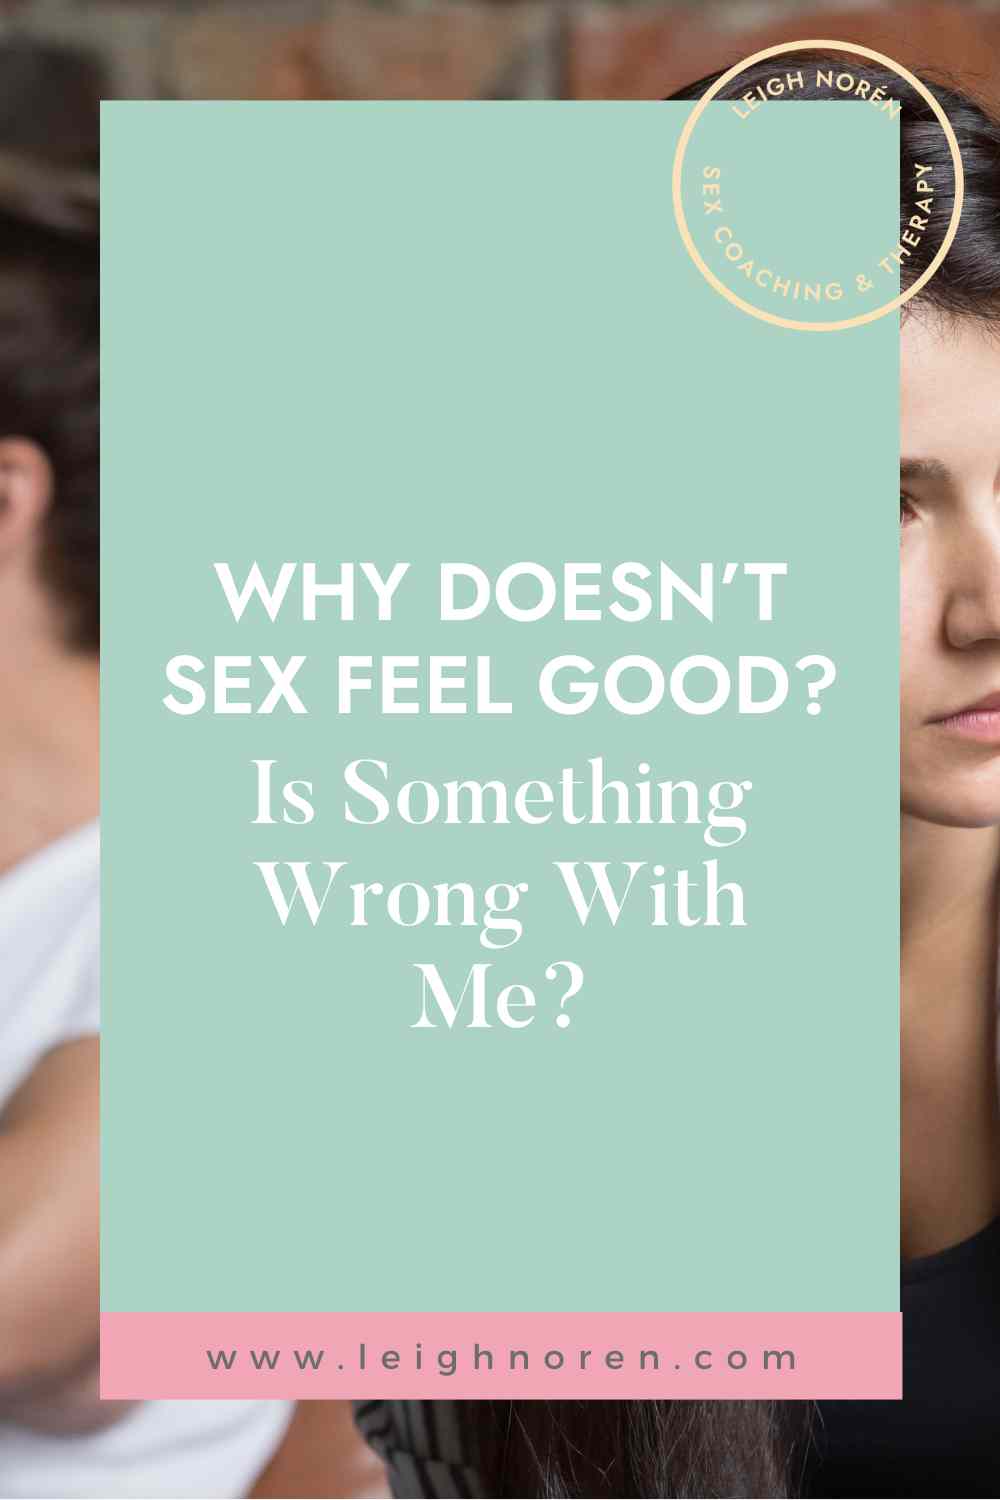 Why Doesn’t Sex Feel Good? Is Something Wrong With Me?